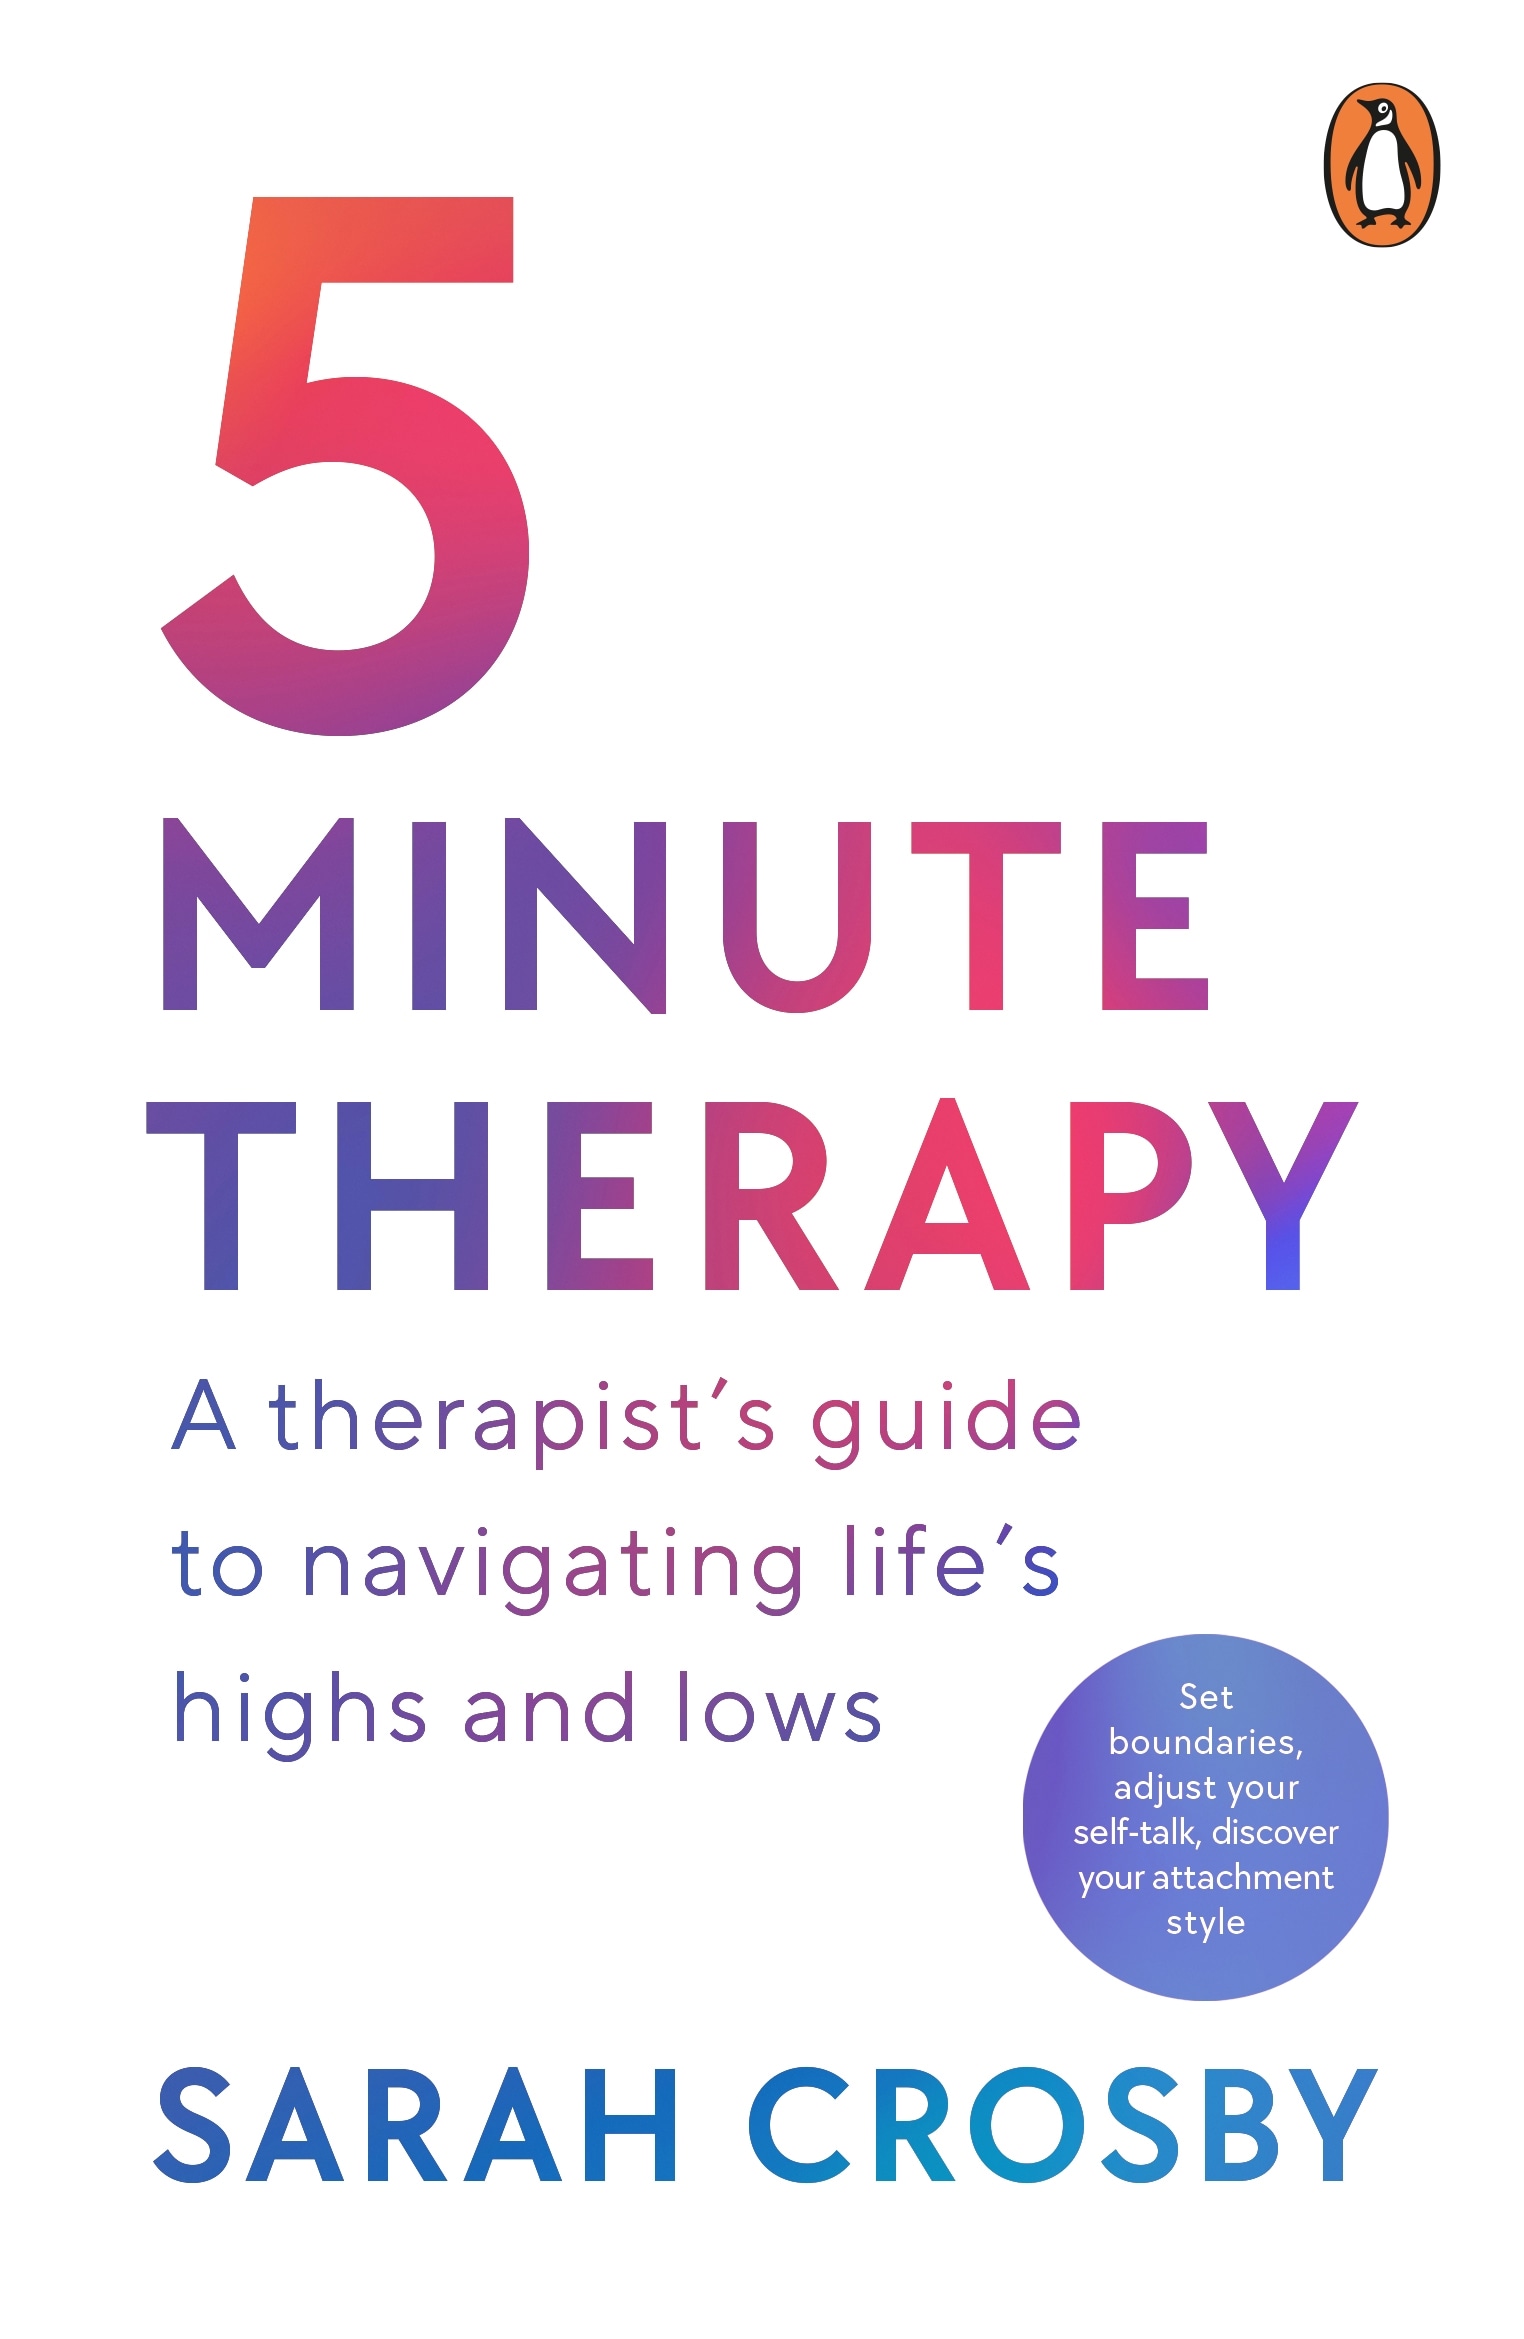 Book “Five Minute Therapy” by Sarah Crosby — January 26, 2023